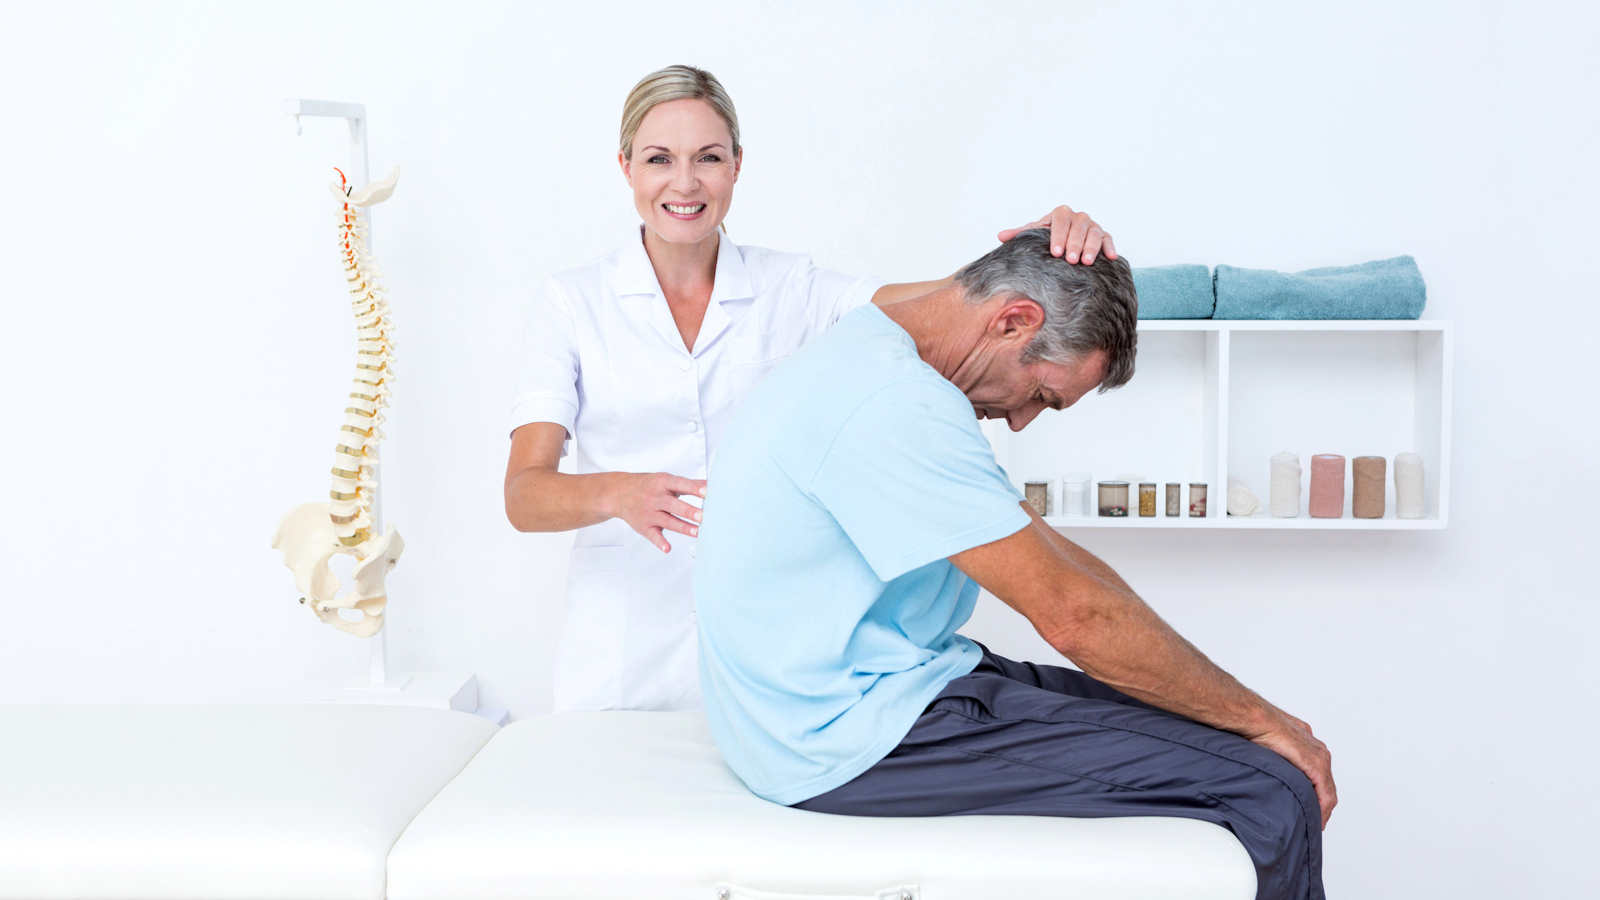 Complete Chiropractic of Sioux Falls